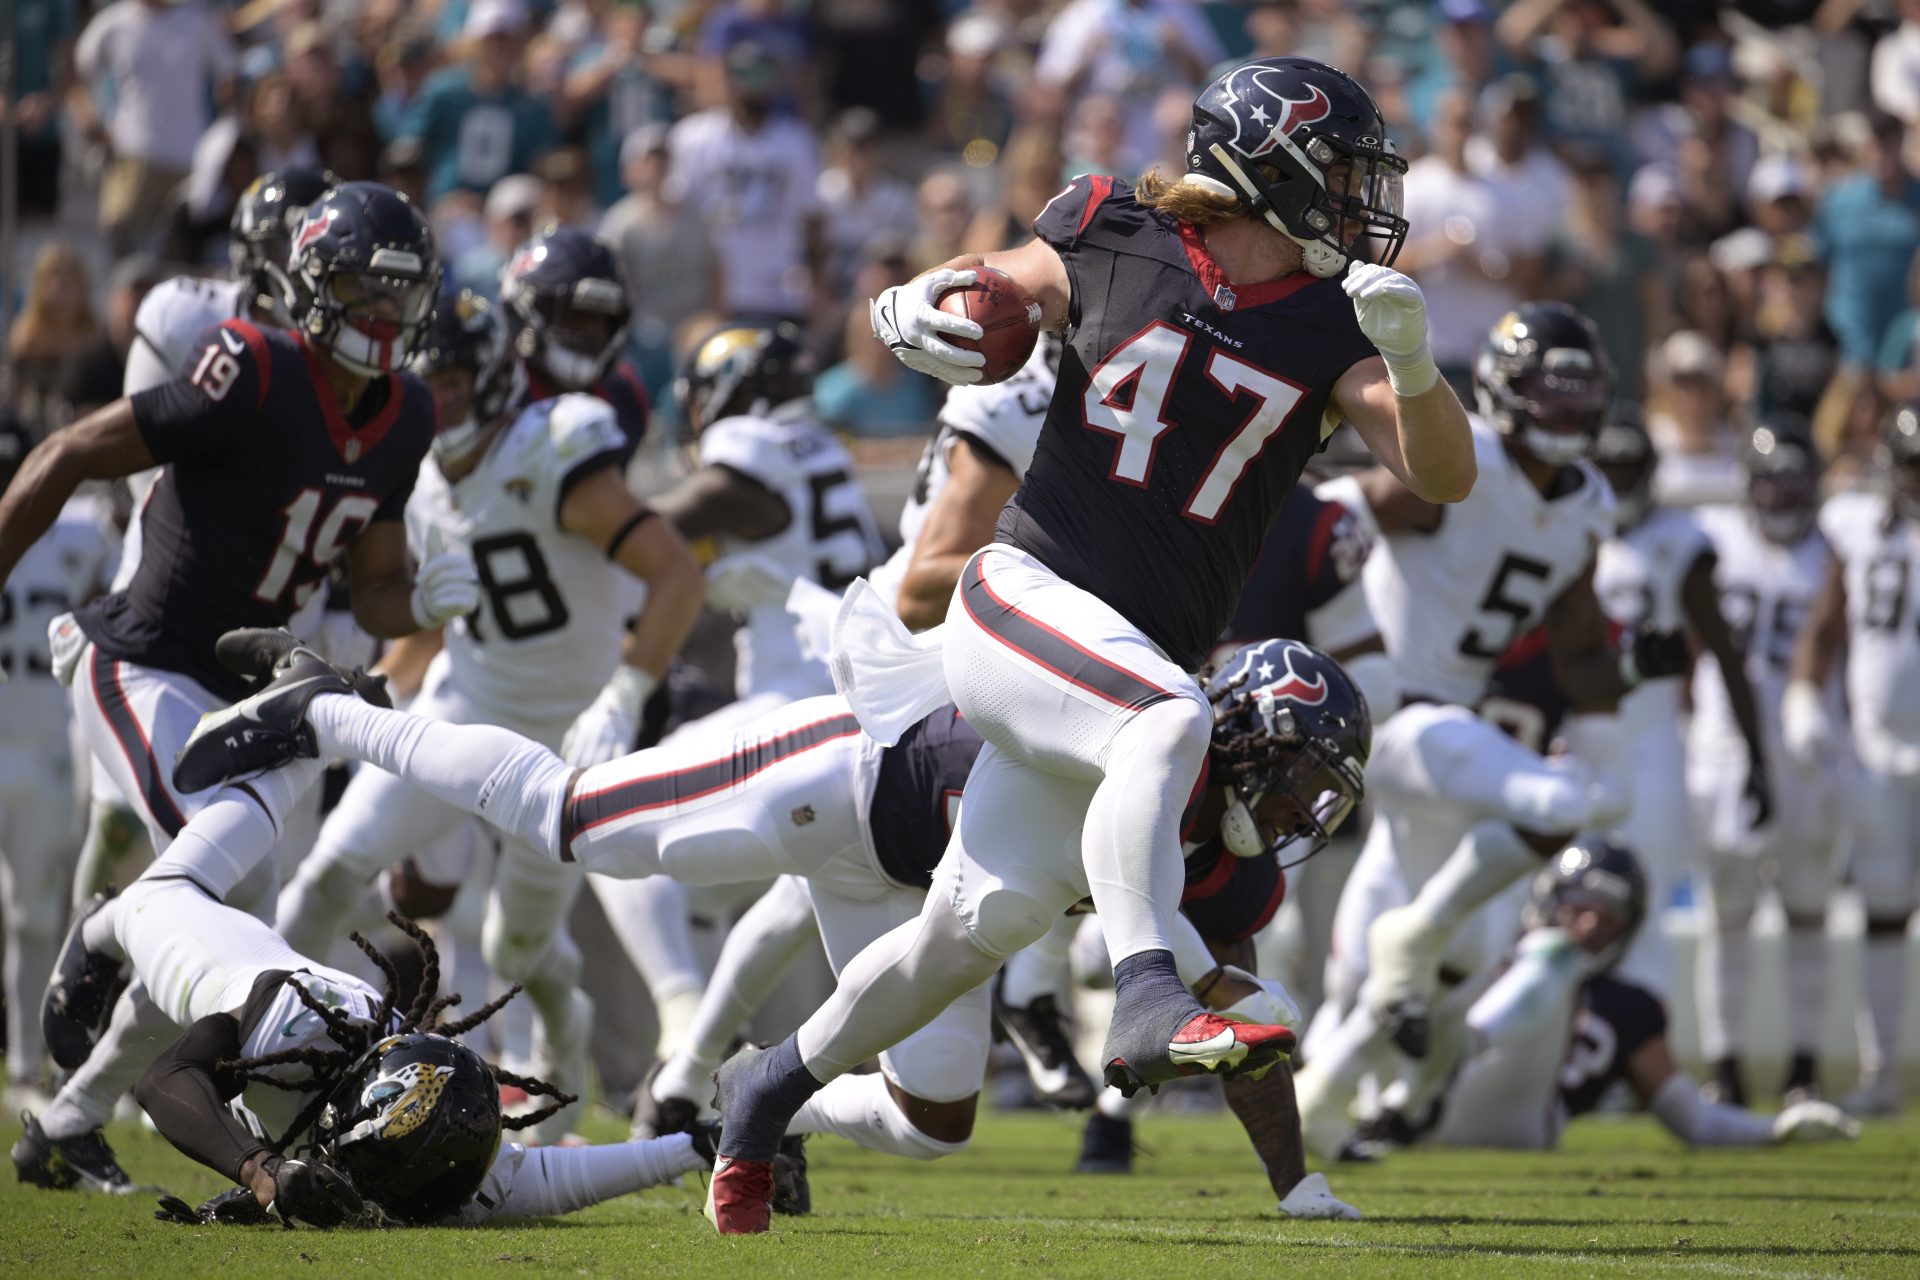 Beck's rare TD return propels Texans to a 37-17 rout of Jaguars